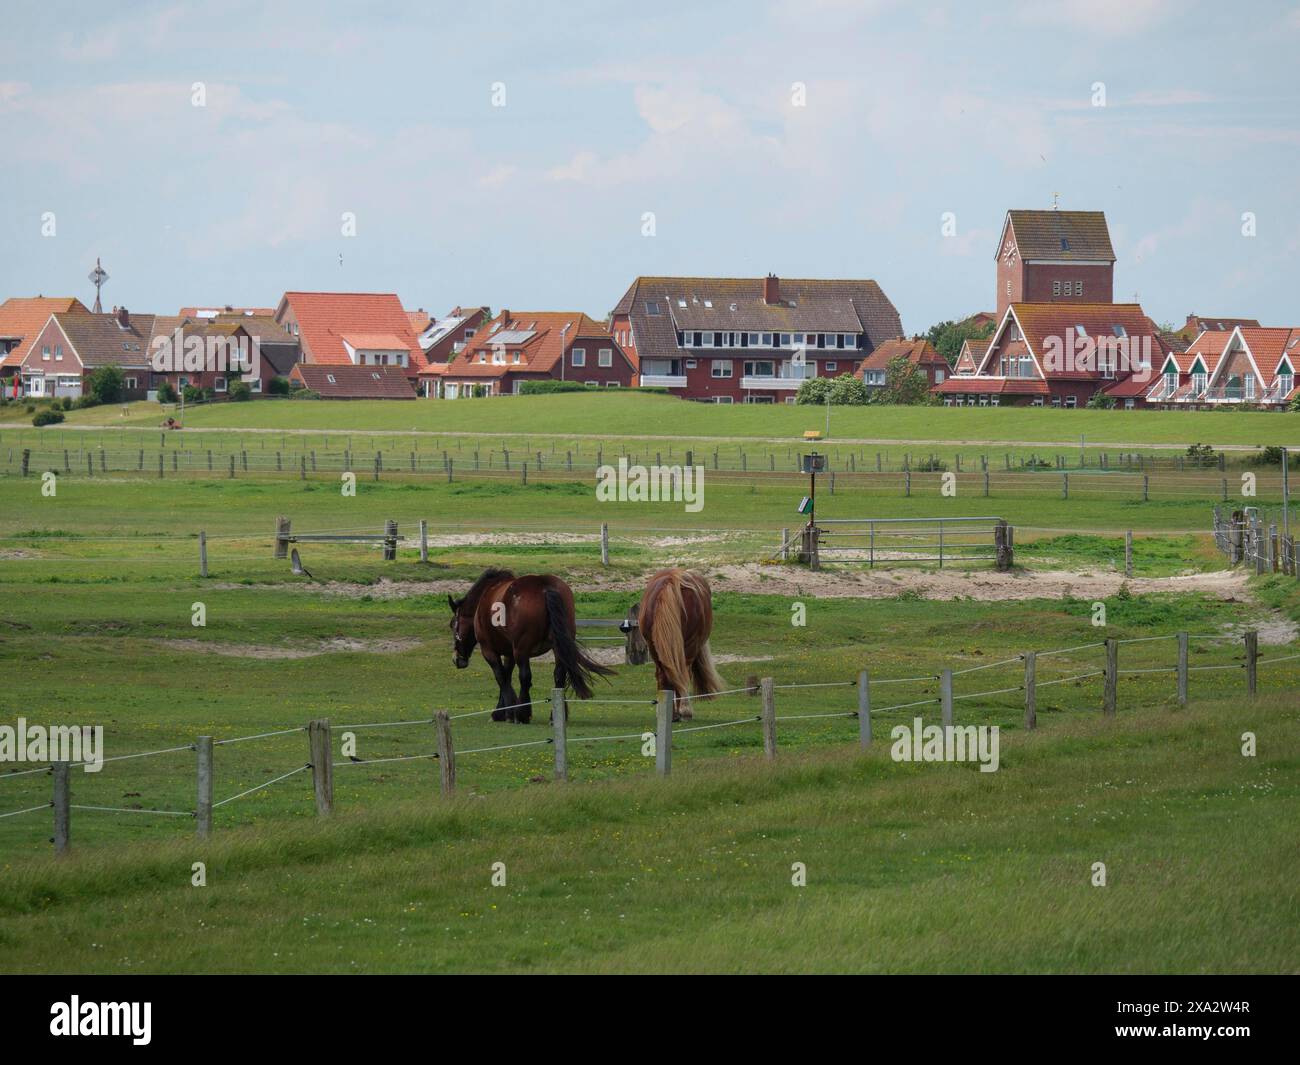 Two horses in a pasture, behind them a village view with various buildings, Baltrum Germany Stock Photo